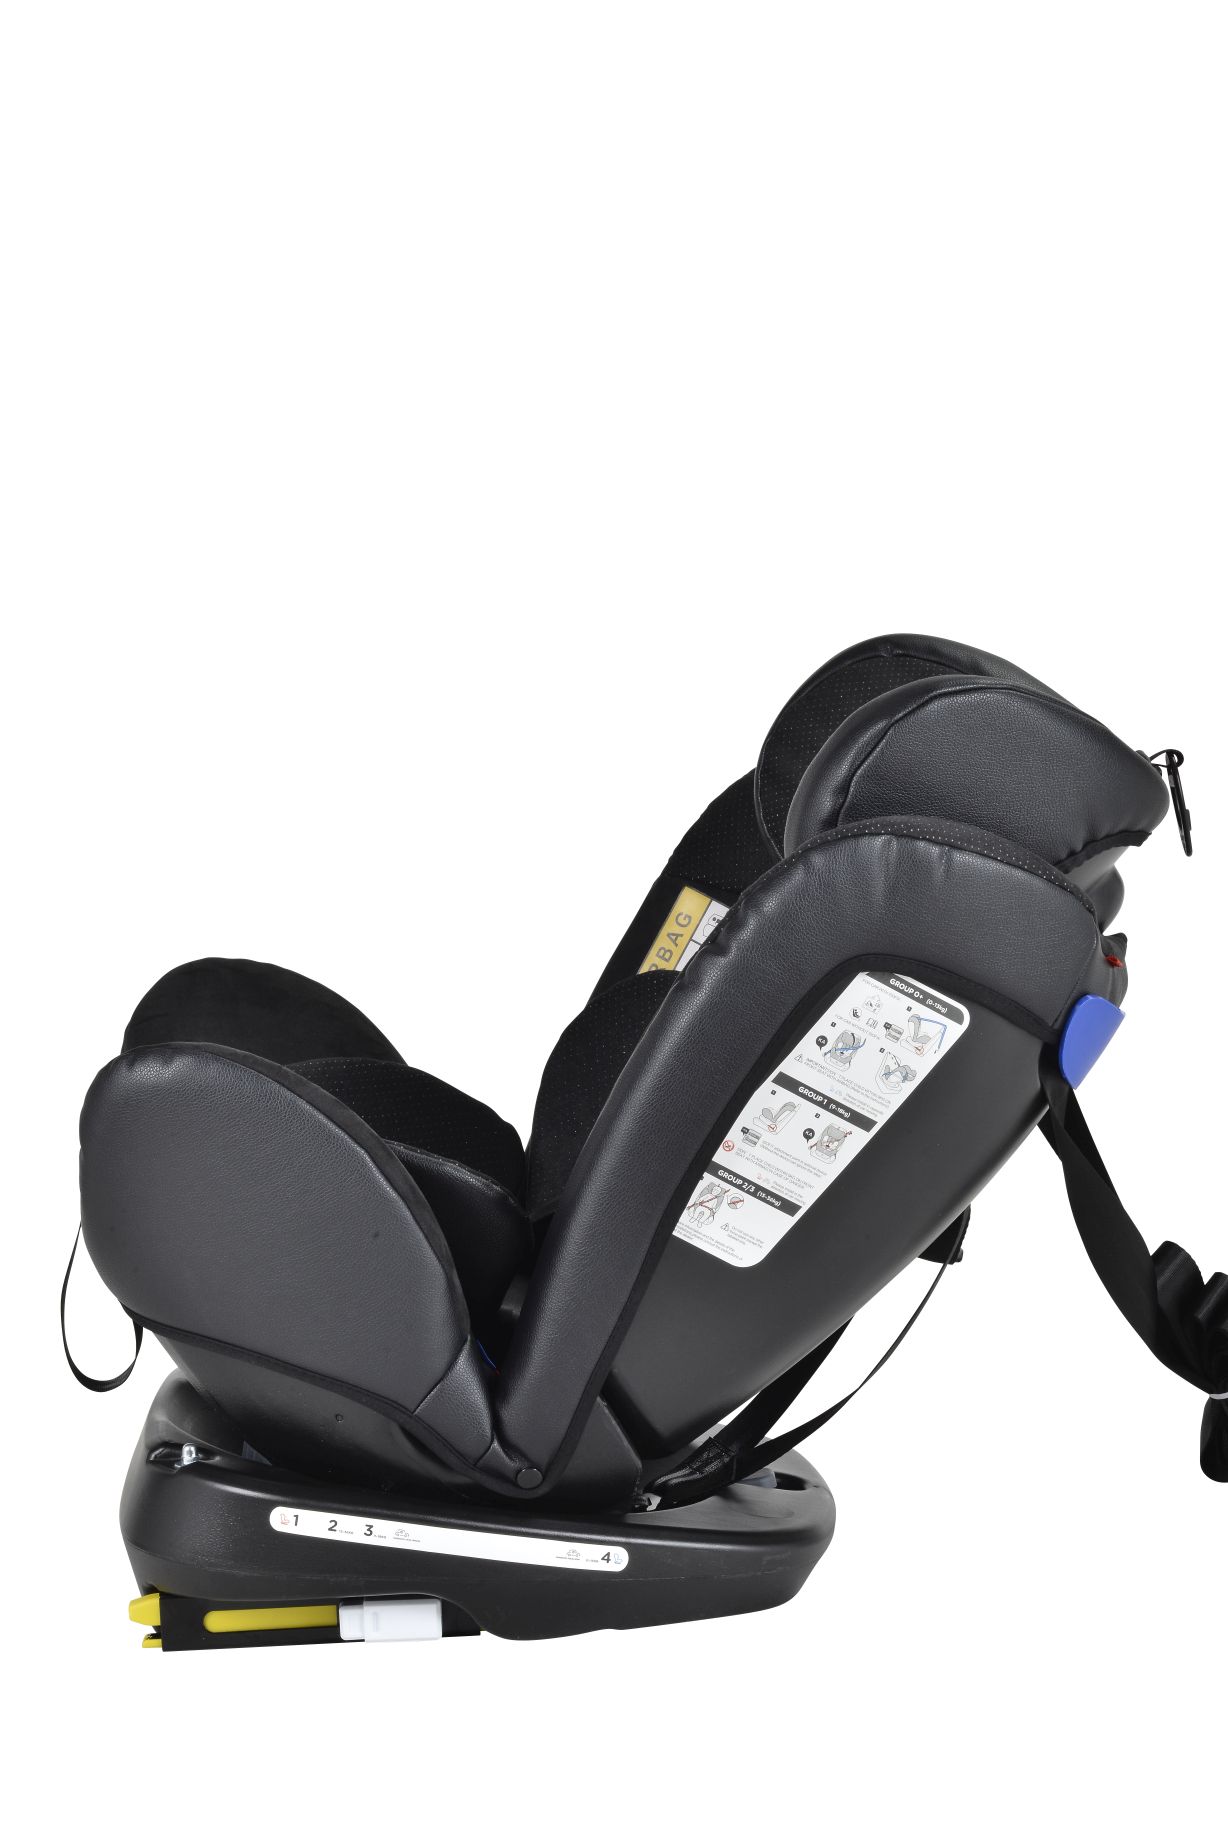 removing car seat from isofix